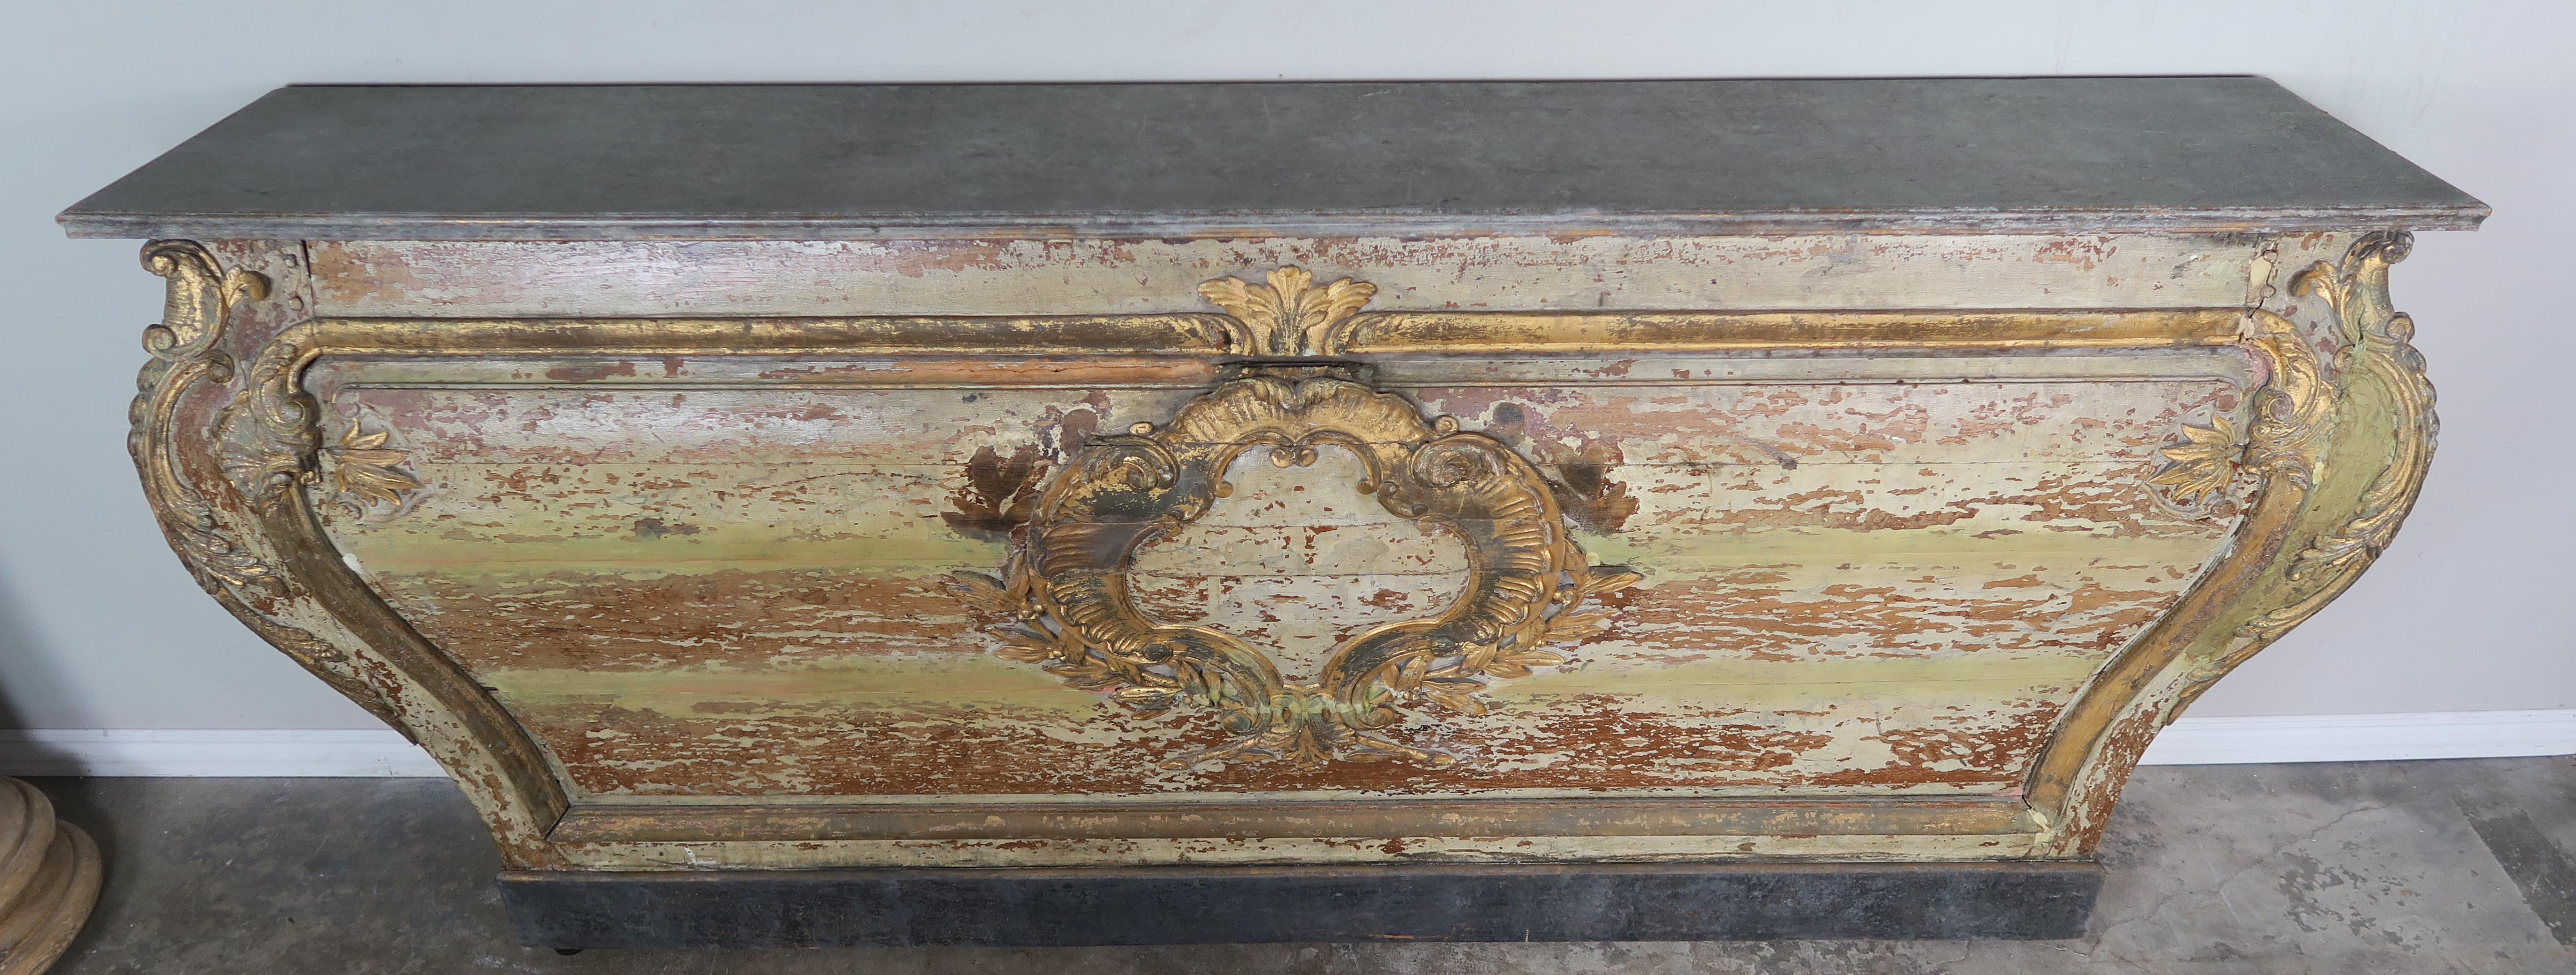 19th century Italian painted console with centre cartouche. Remnants of paint in golds, creams and rust can be seen combined with gold leaf accents.